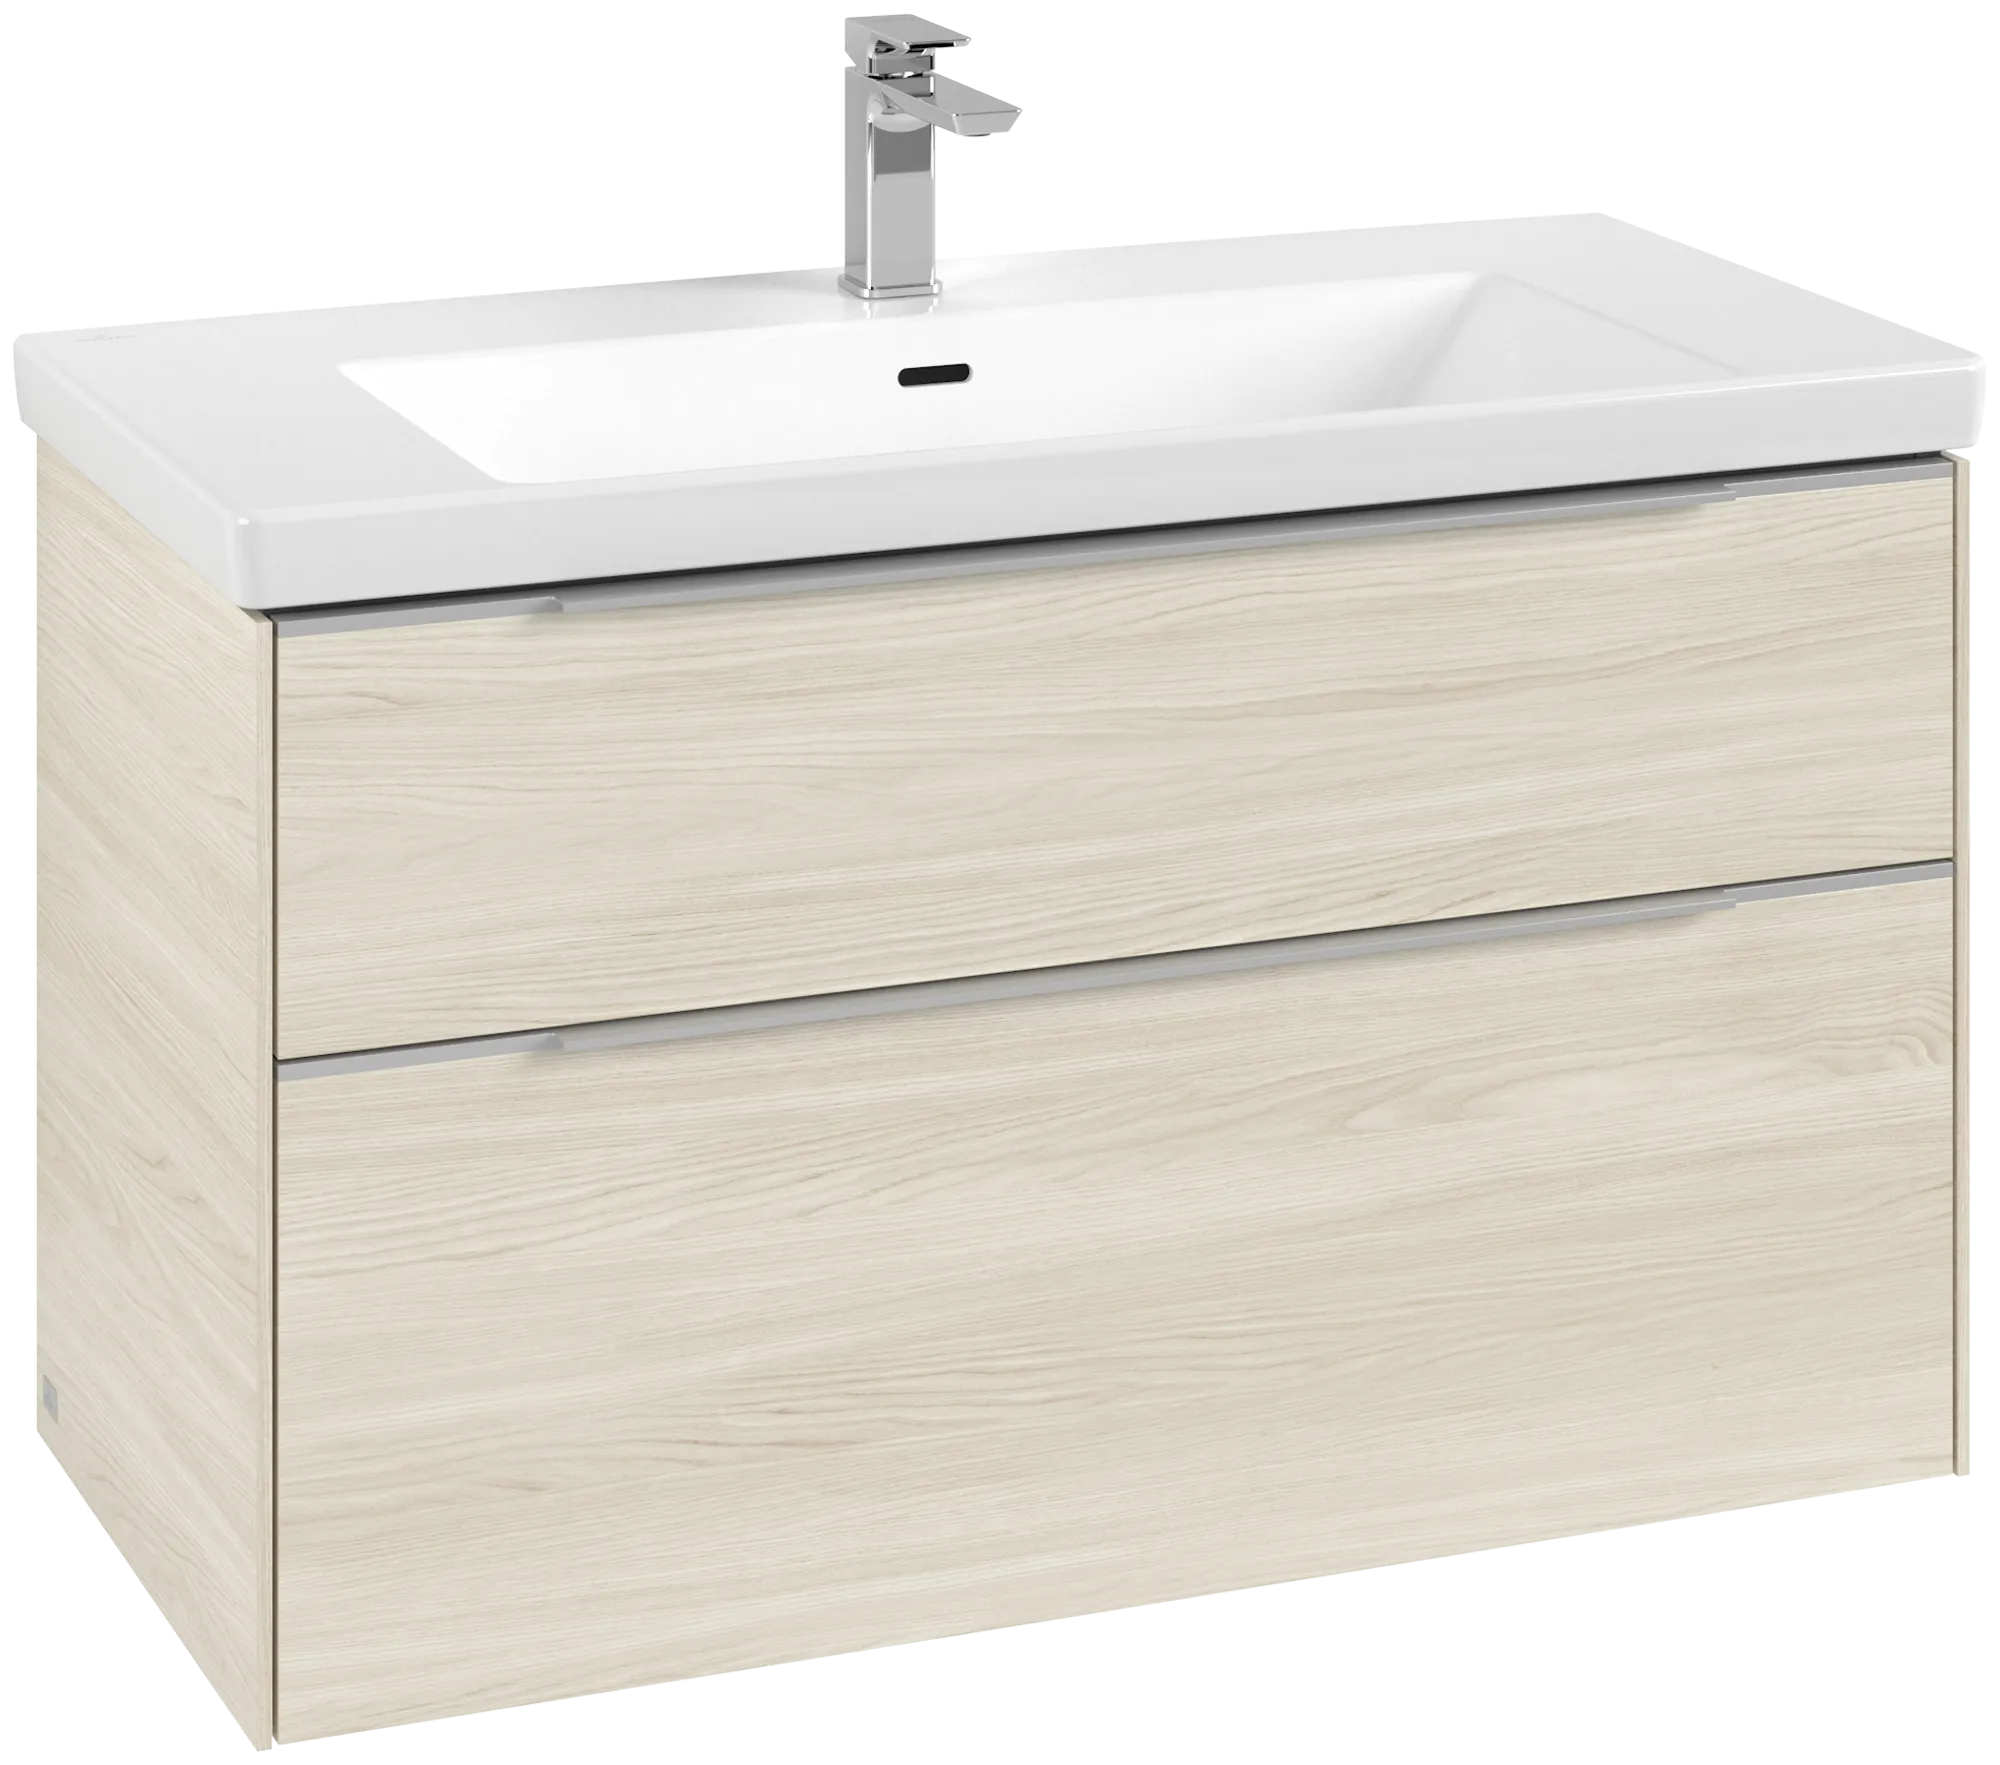 Picture of VILLEROY BOCH Subway 3.0 Vanity unit, 2 pull-out compartments, 973 x 576 x 478 mm, White Oak #C57000AA